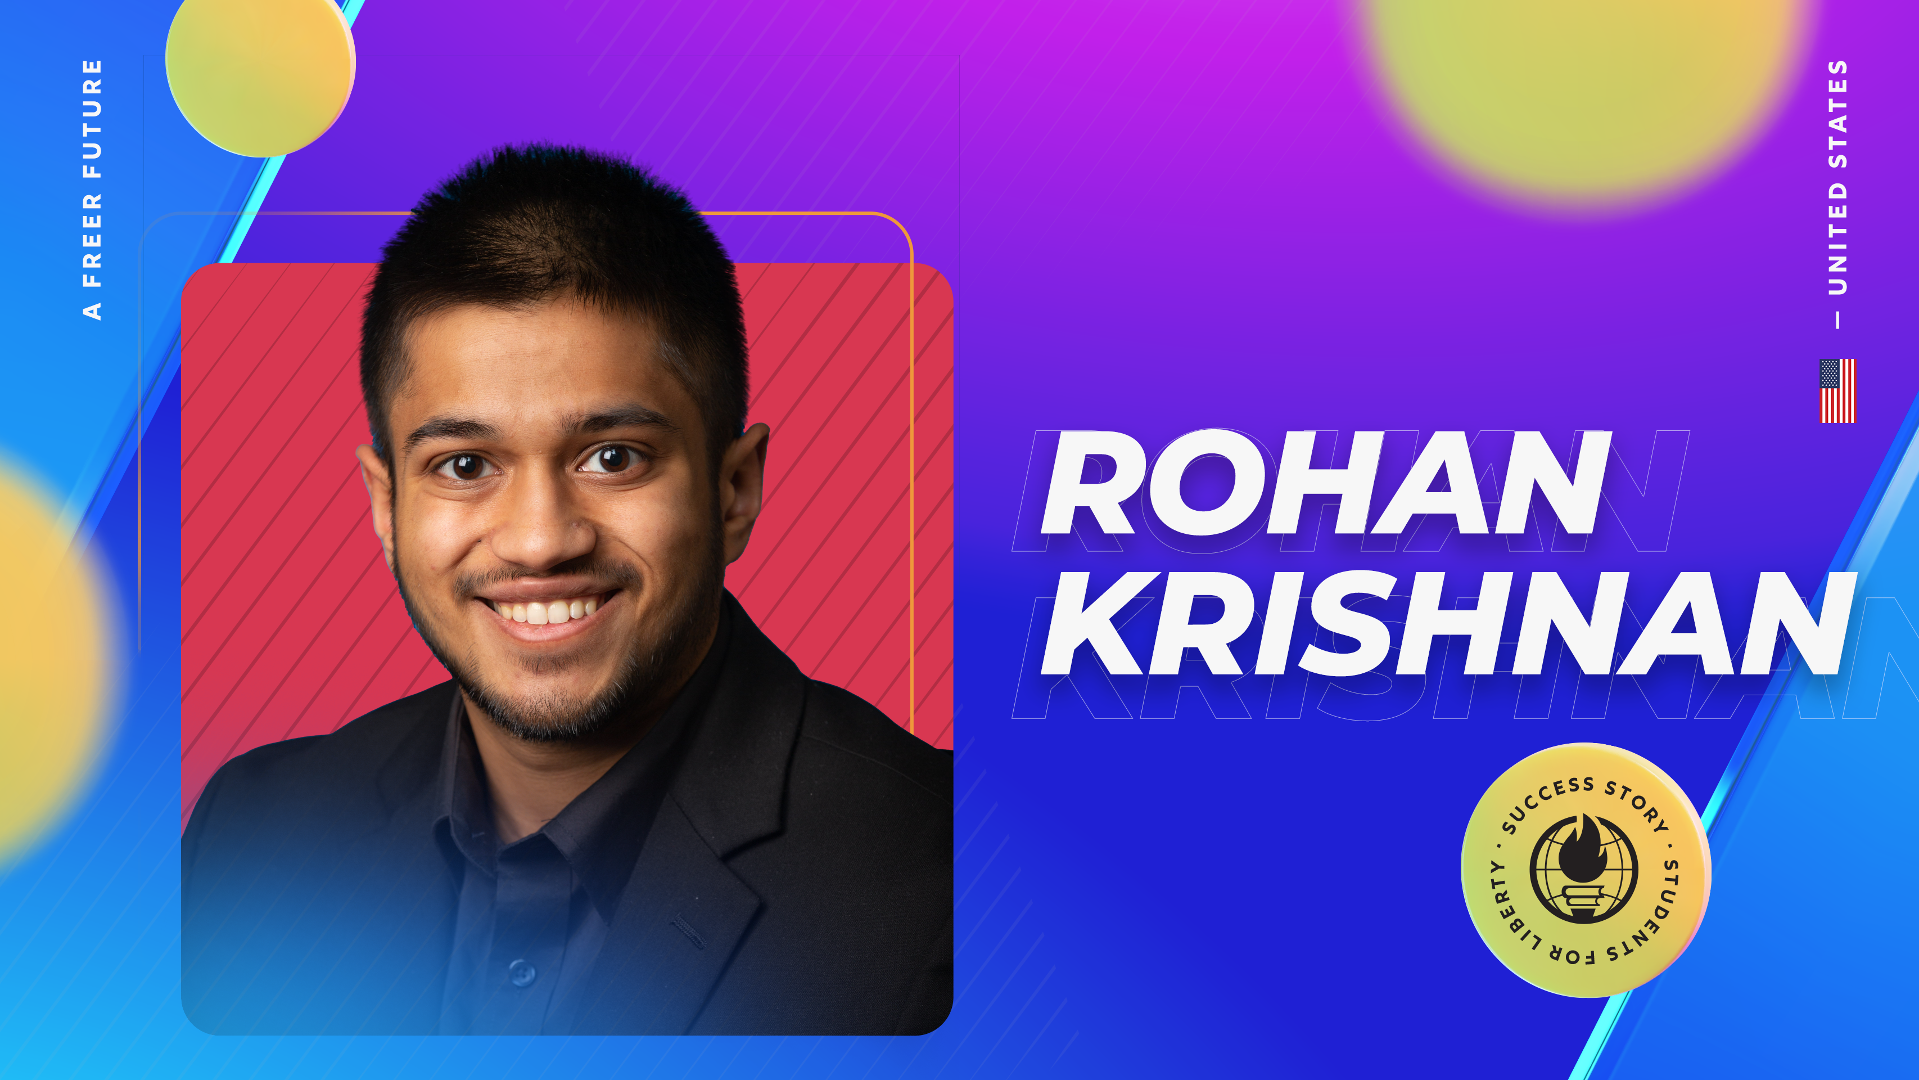 Rohan Krishnan, a junior at Yale University and SFL Local Coordinator, has emerged as a passionate advocate for free speech and civil liberties